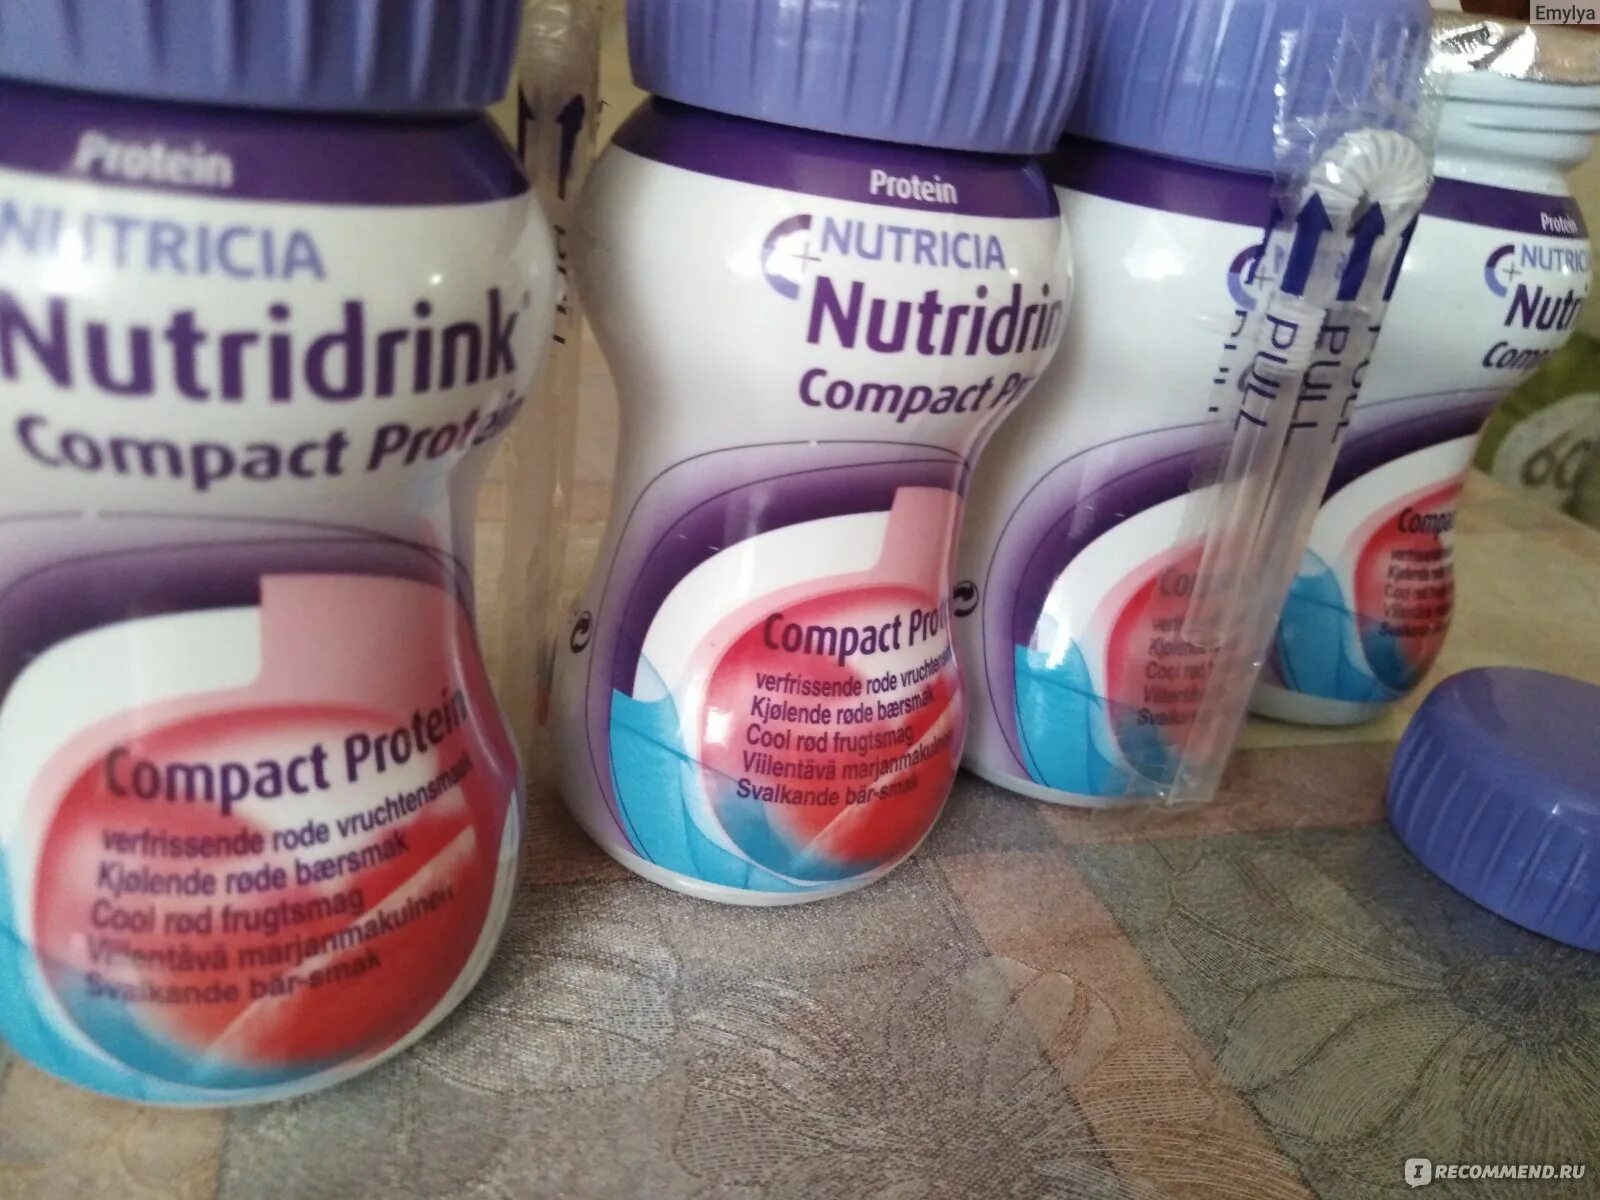 Nutridrink Compact Protein. Нутридринк порошок Protein. Нутридринк питание. Нутридринк для питание взрослых.